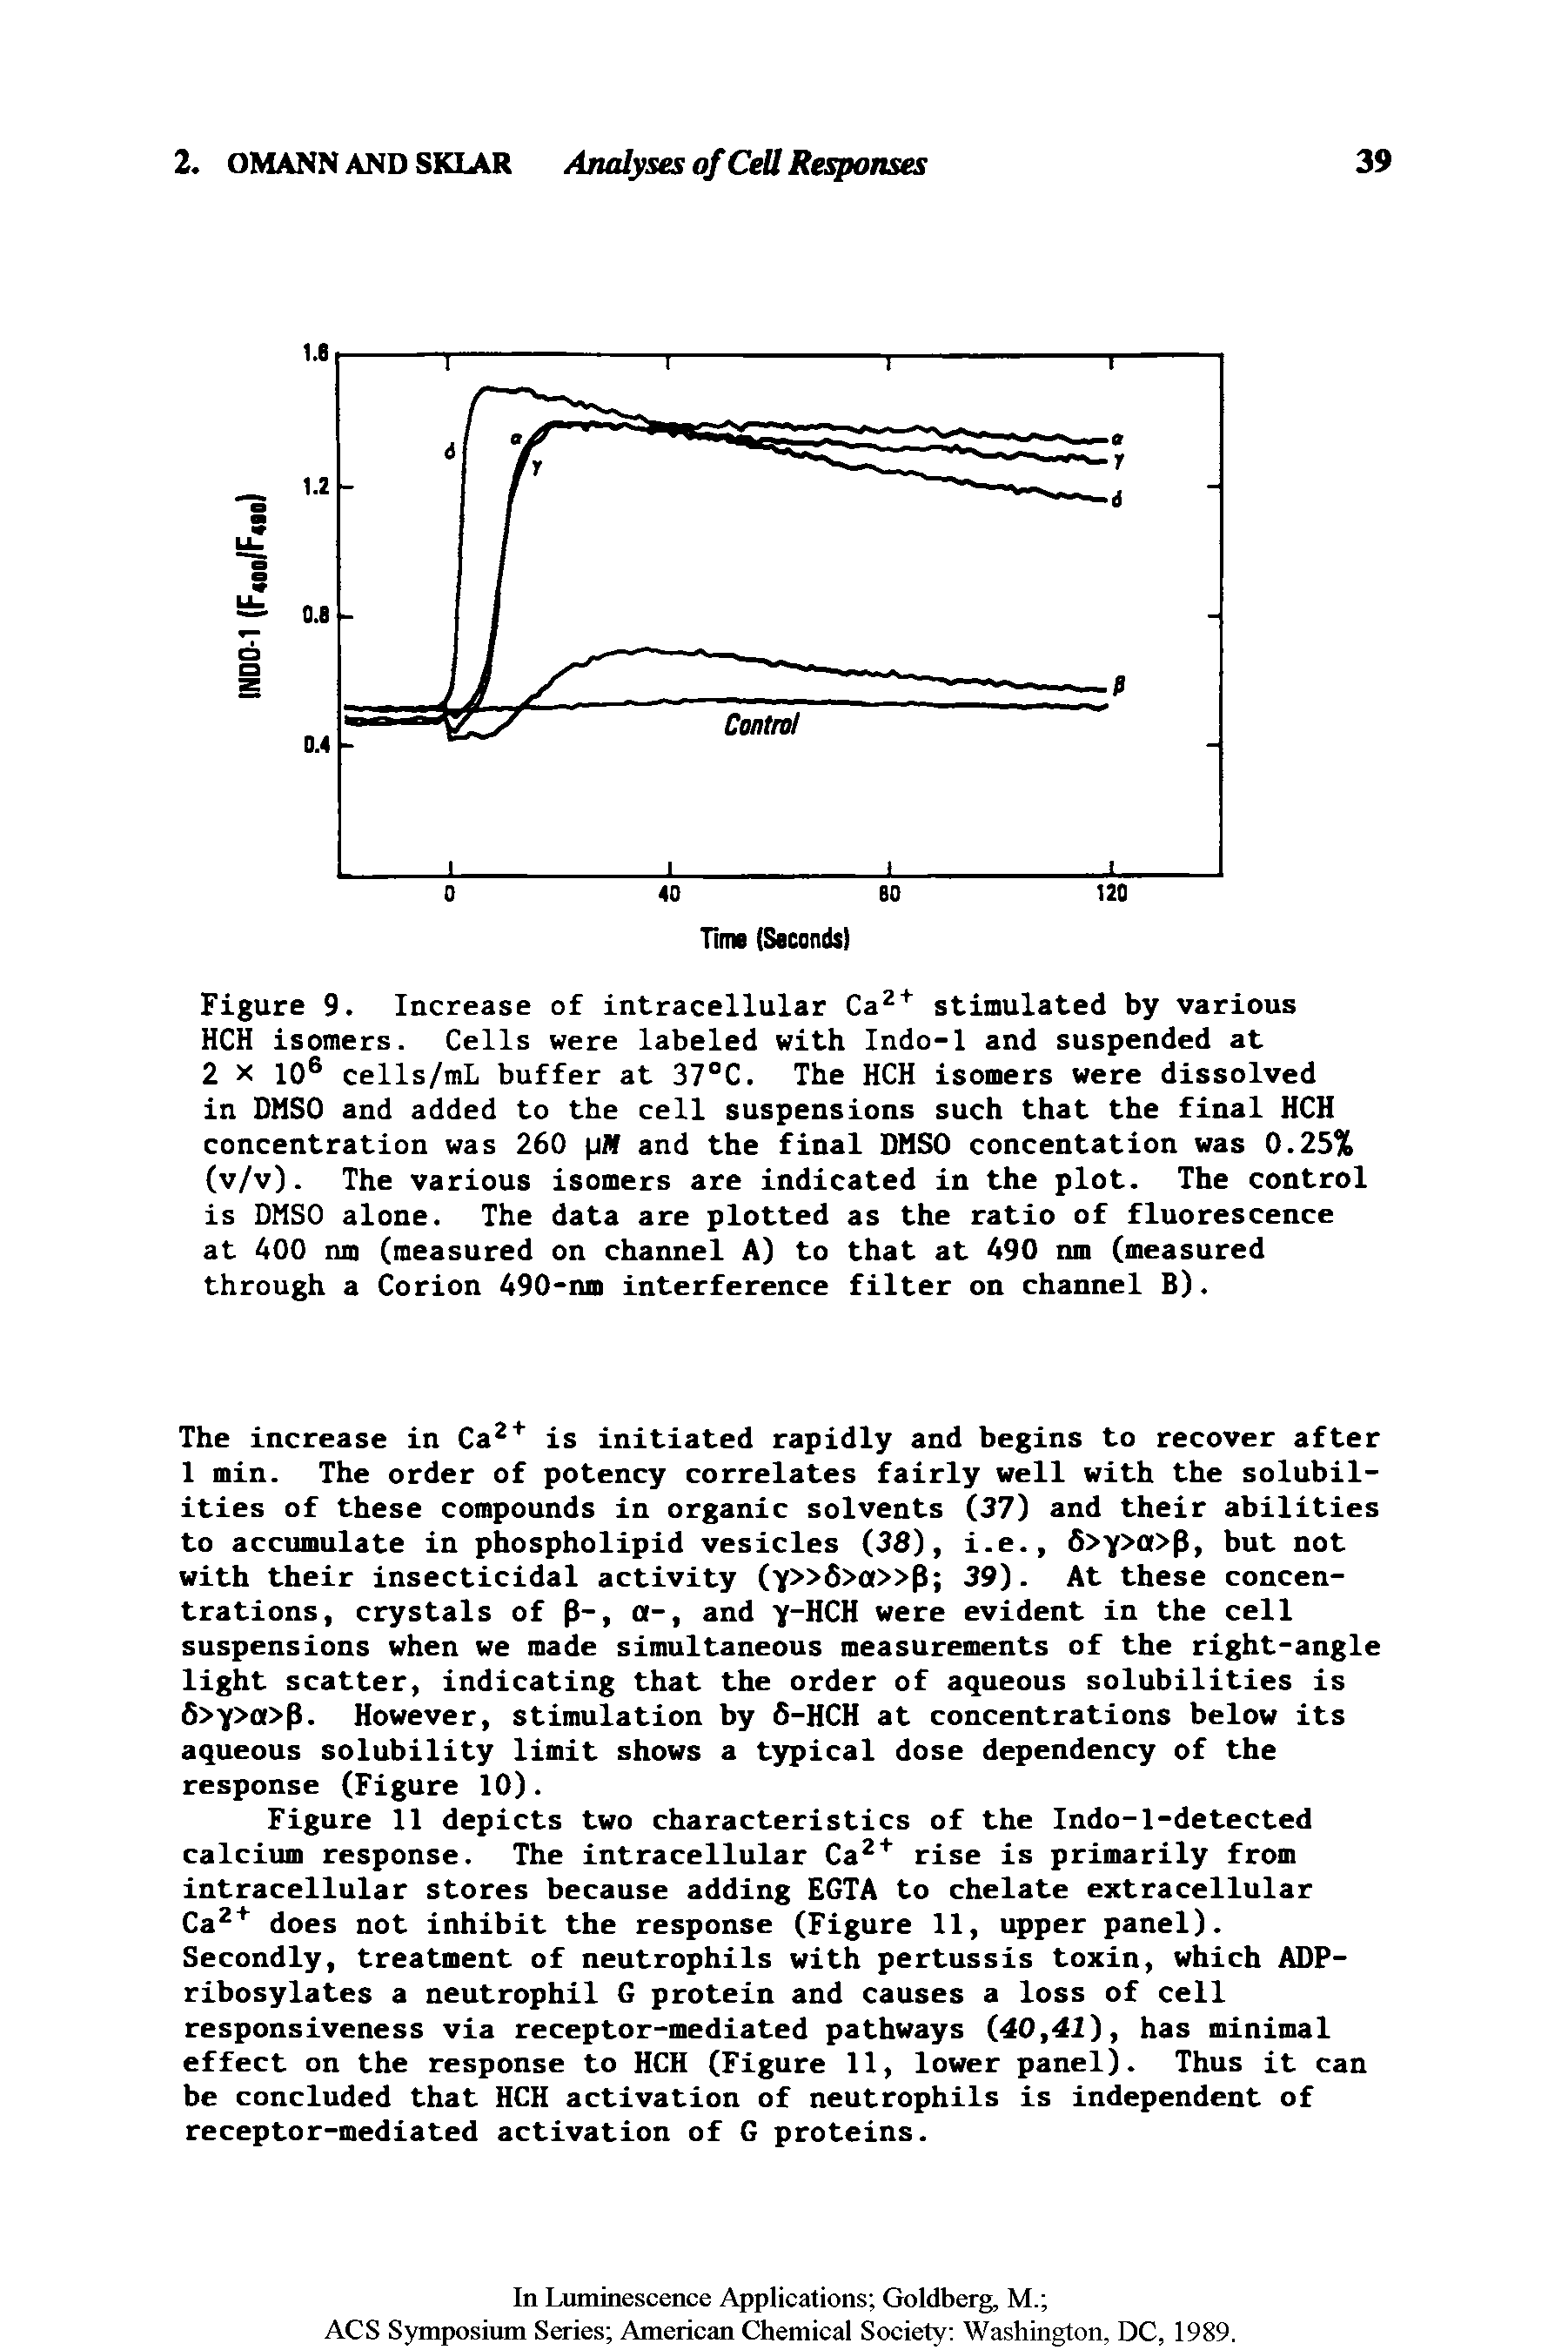 Figure 9. Increase of intracellular Ca stimulated by various HCH isomers. Cells were labeled with lndo-1 and suspended at 2 X 10 cells/mL buffer at 37°C. The HCH isomers were dissolved in DMSO and added to the cell suspensions such that the final HCH concentration was 260 pff and the final DMSO concentation was 0.25% (v/v). The various isomers are indicated in the plot. The control is DMSO alone. The data are plotted as the ratio of fluorescence at 400 nm (measured on channel A) to that at 490 nm (measured through a Corion 490-nm interference filter on channel B).